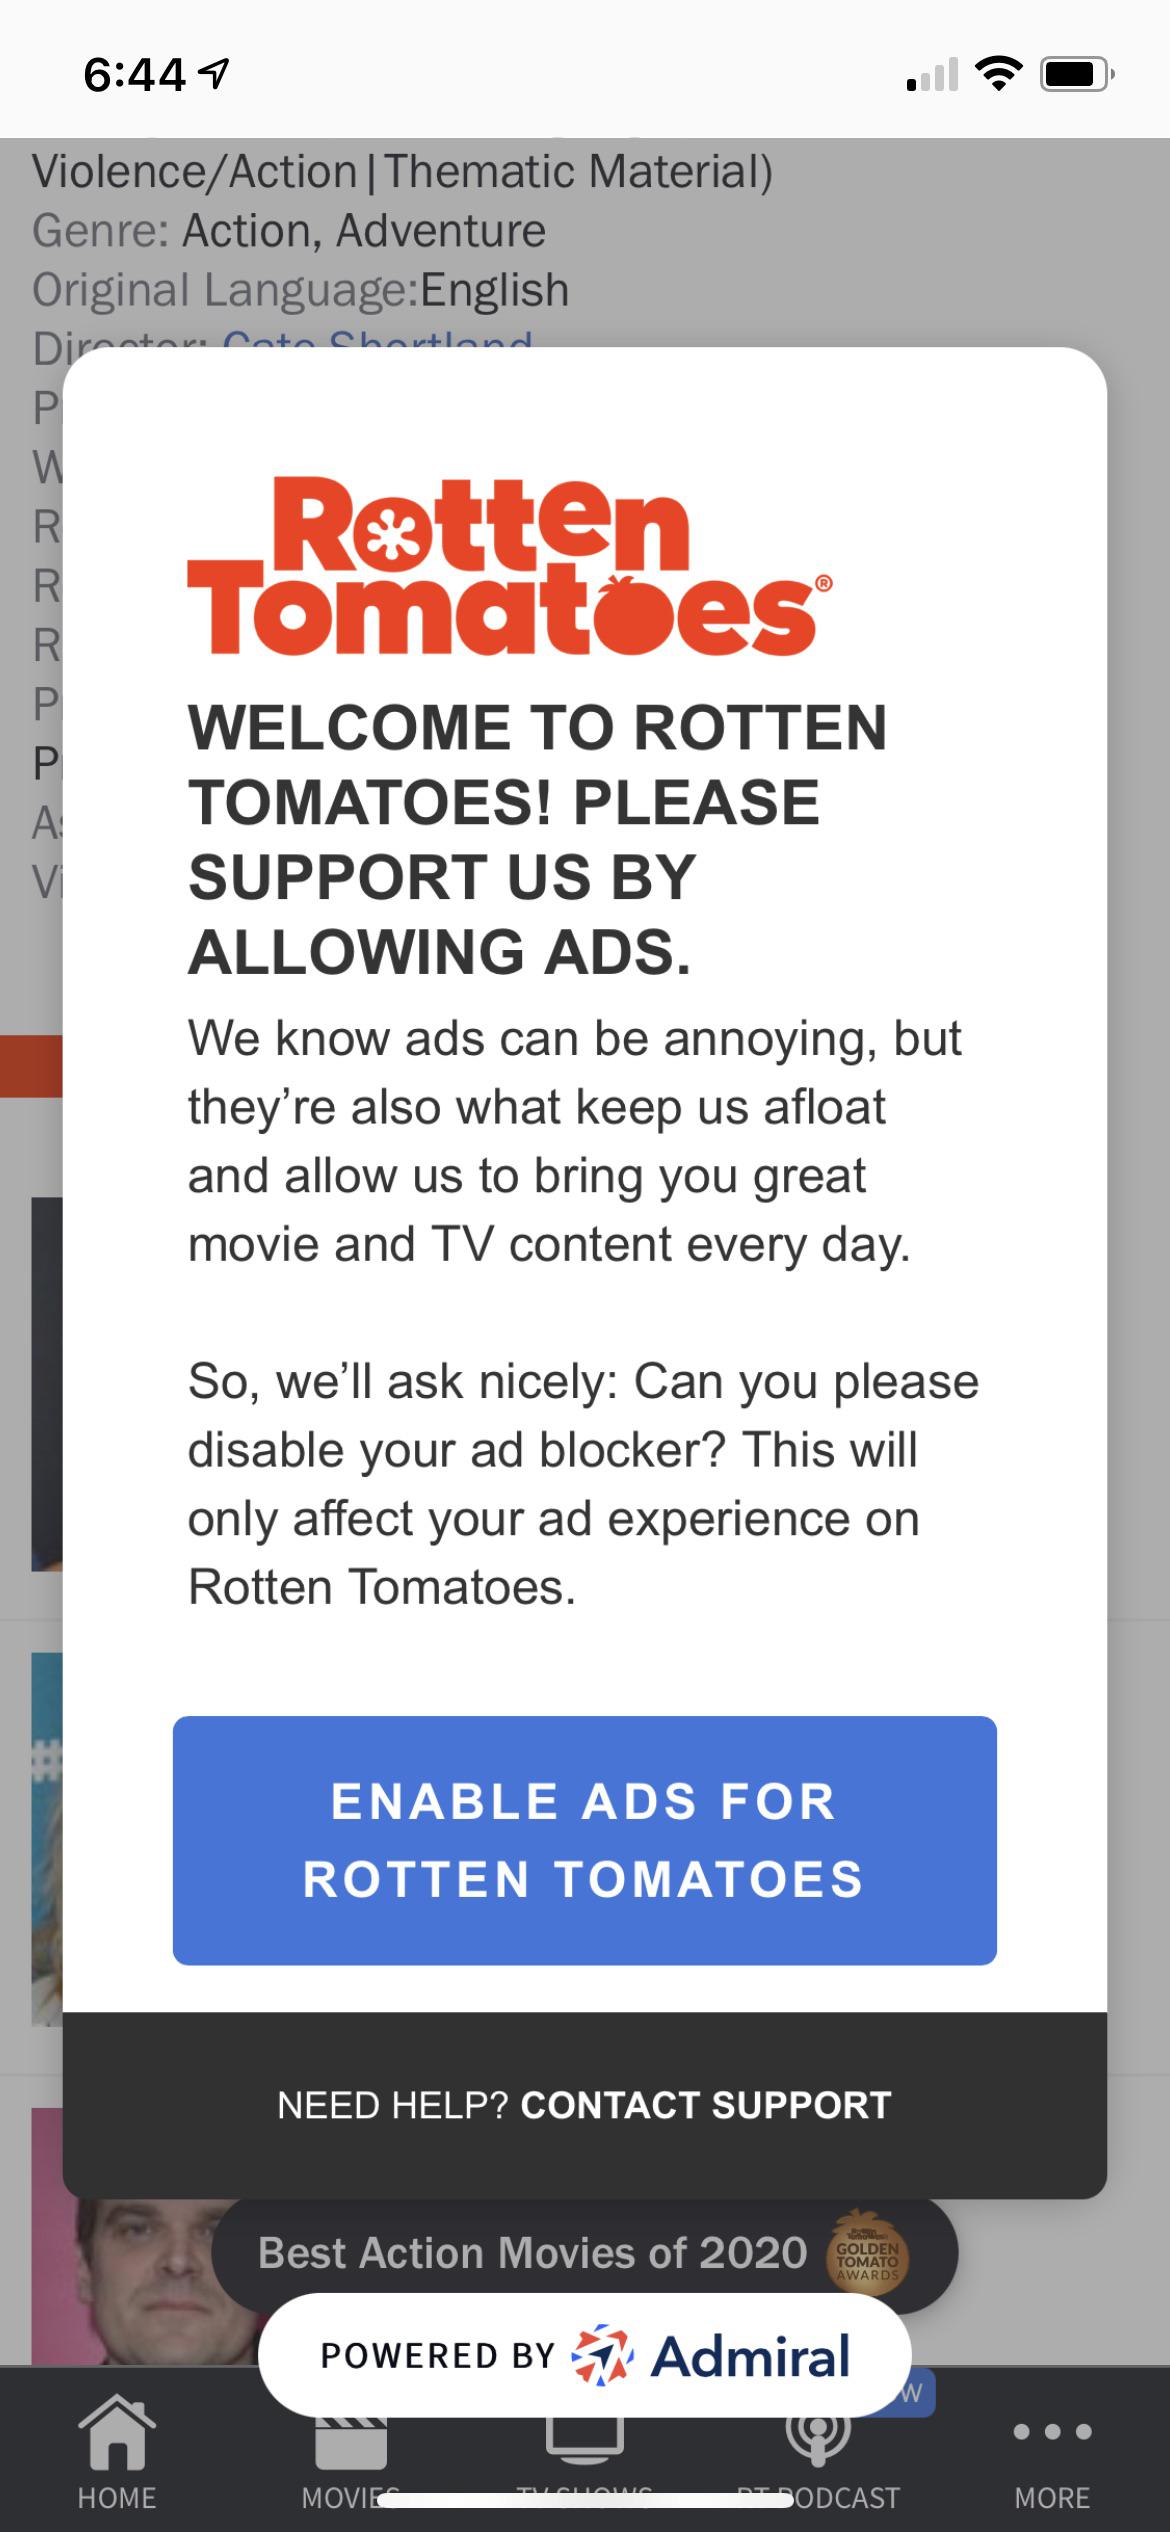 In such situations, you need to disable your ad-blocker and enable it for the sites where you watch movies.